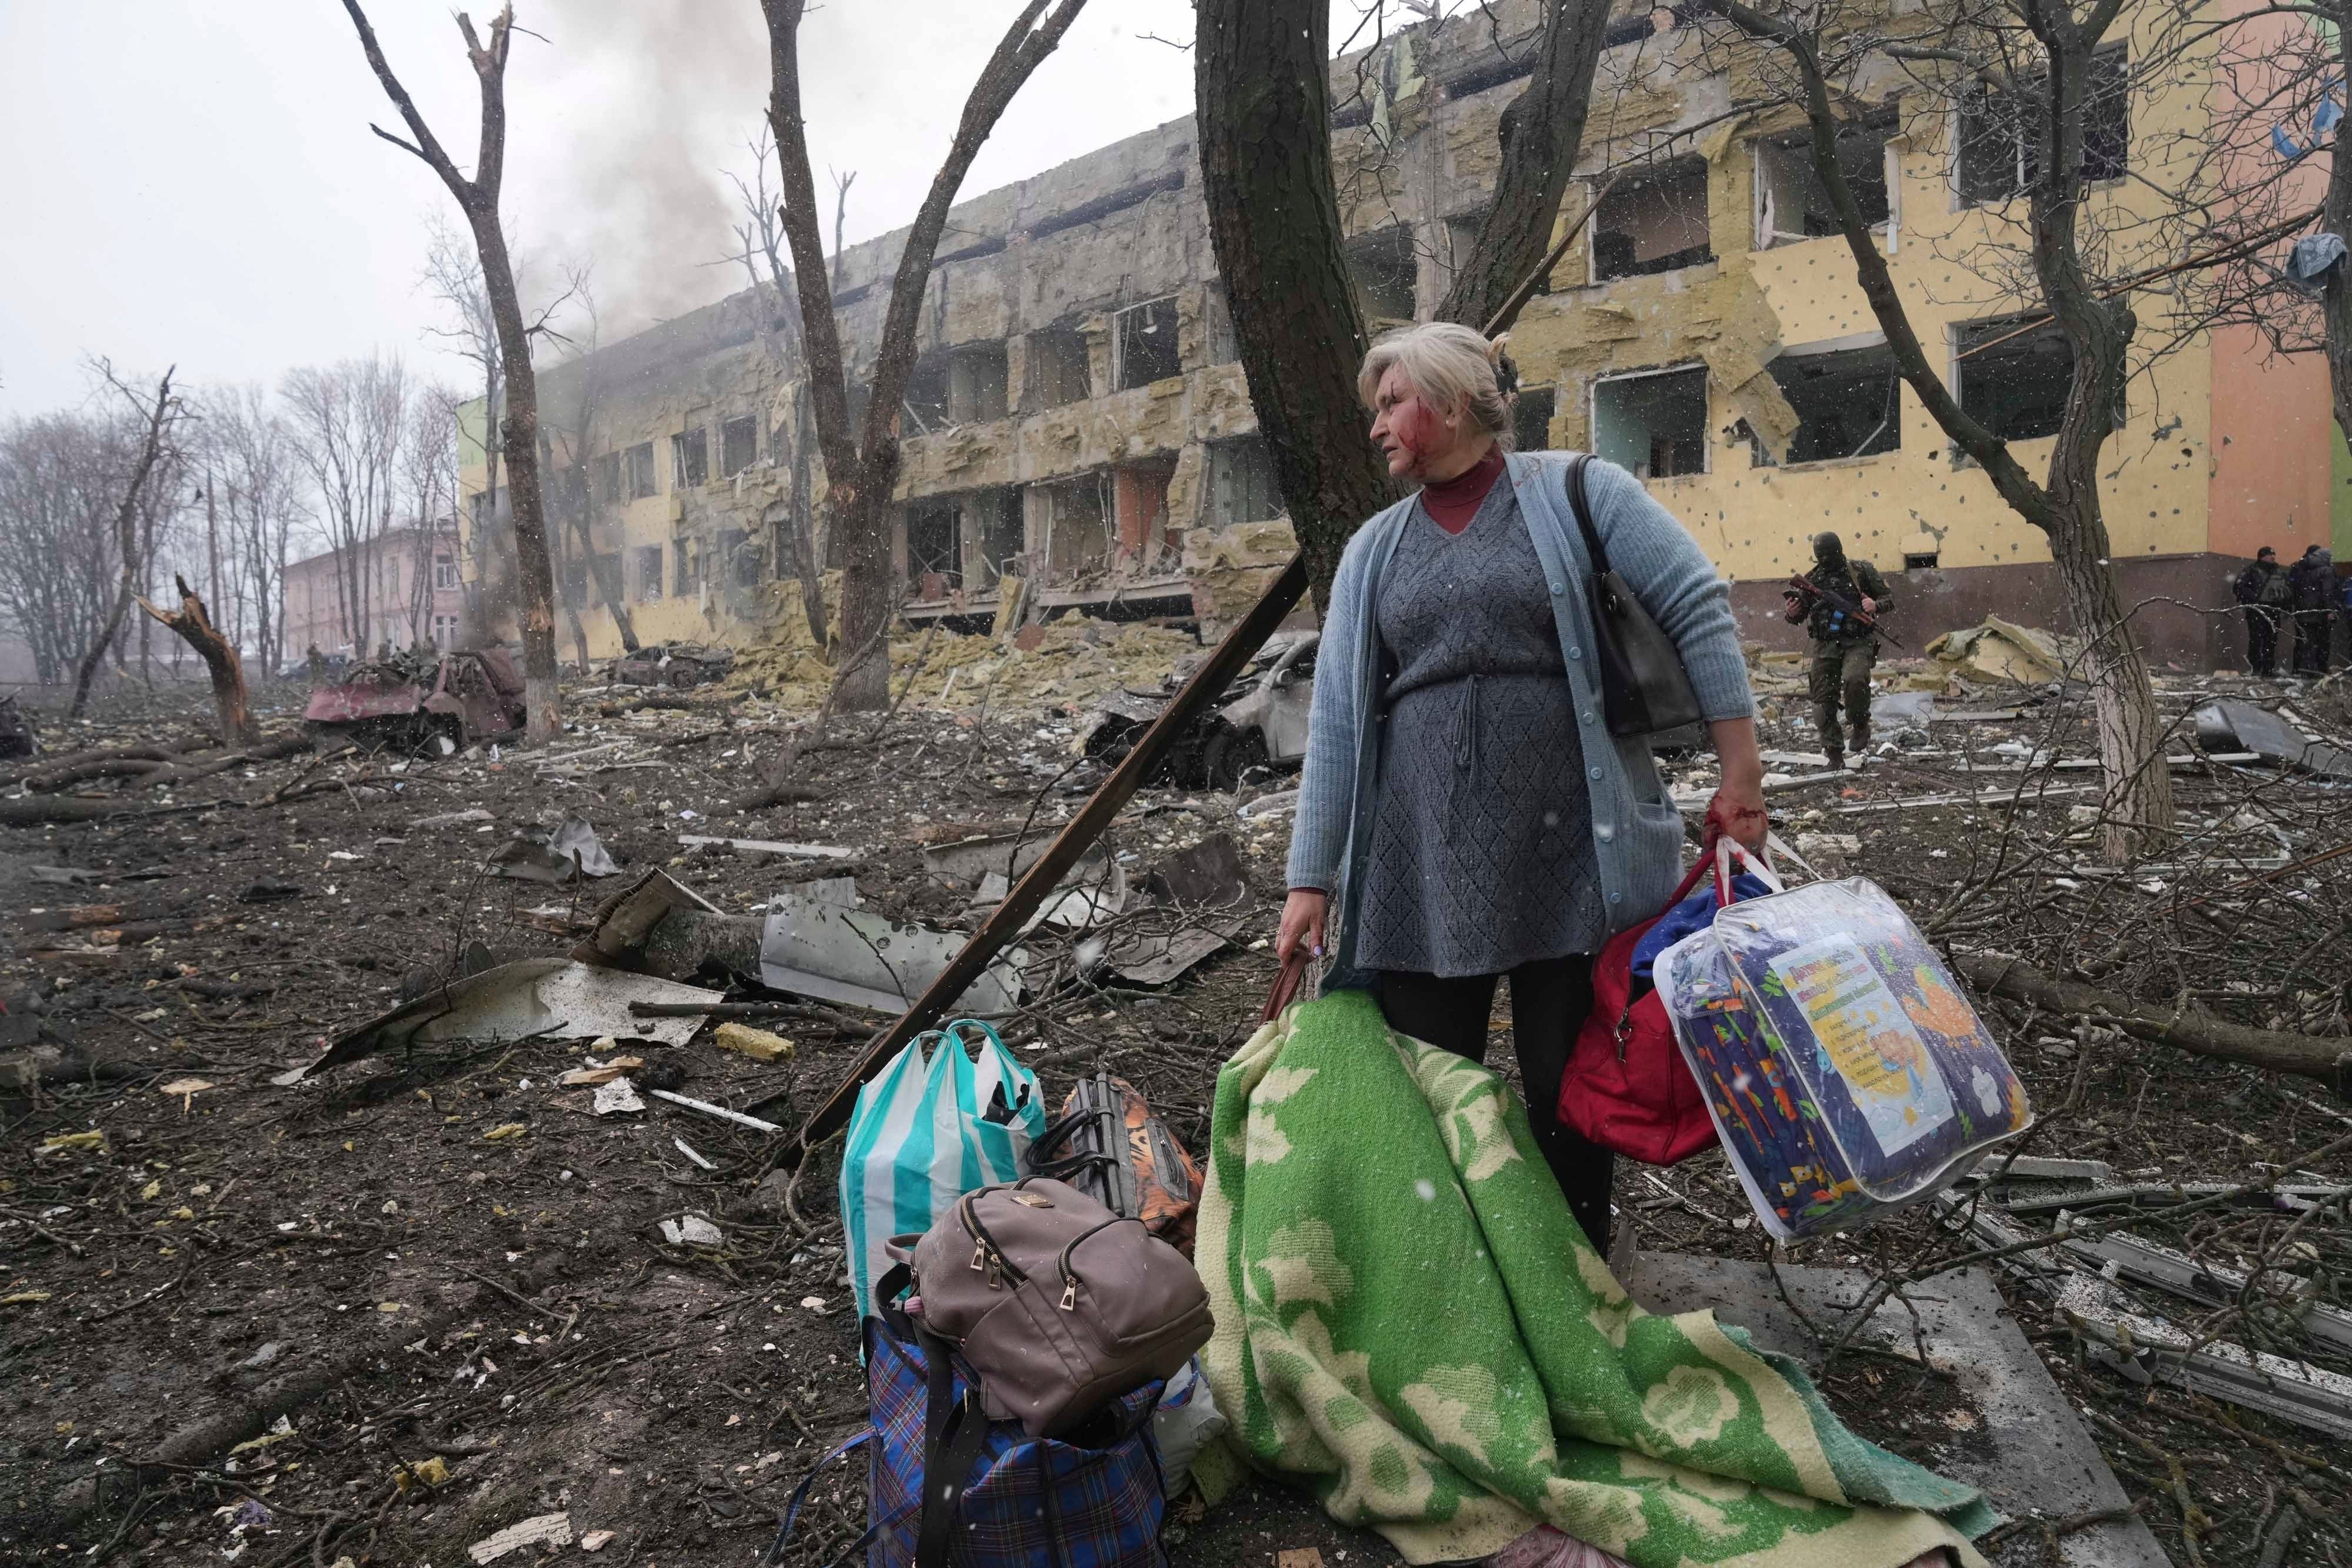 What is it about Mariupol that has made it the bloodiest focus of this now month-old war?